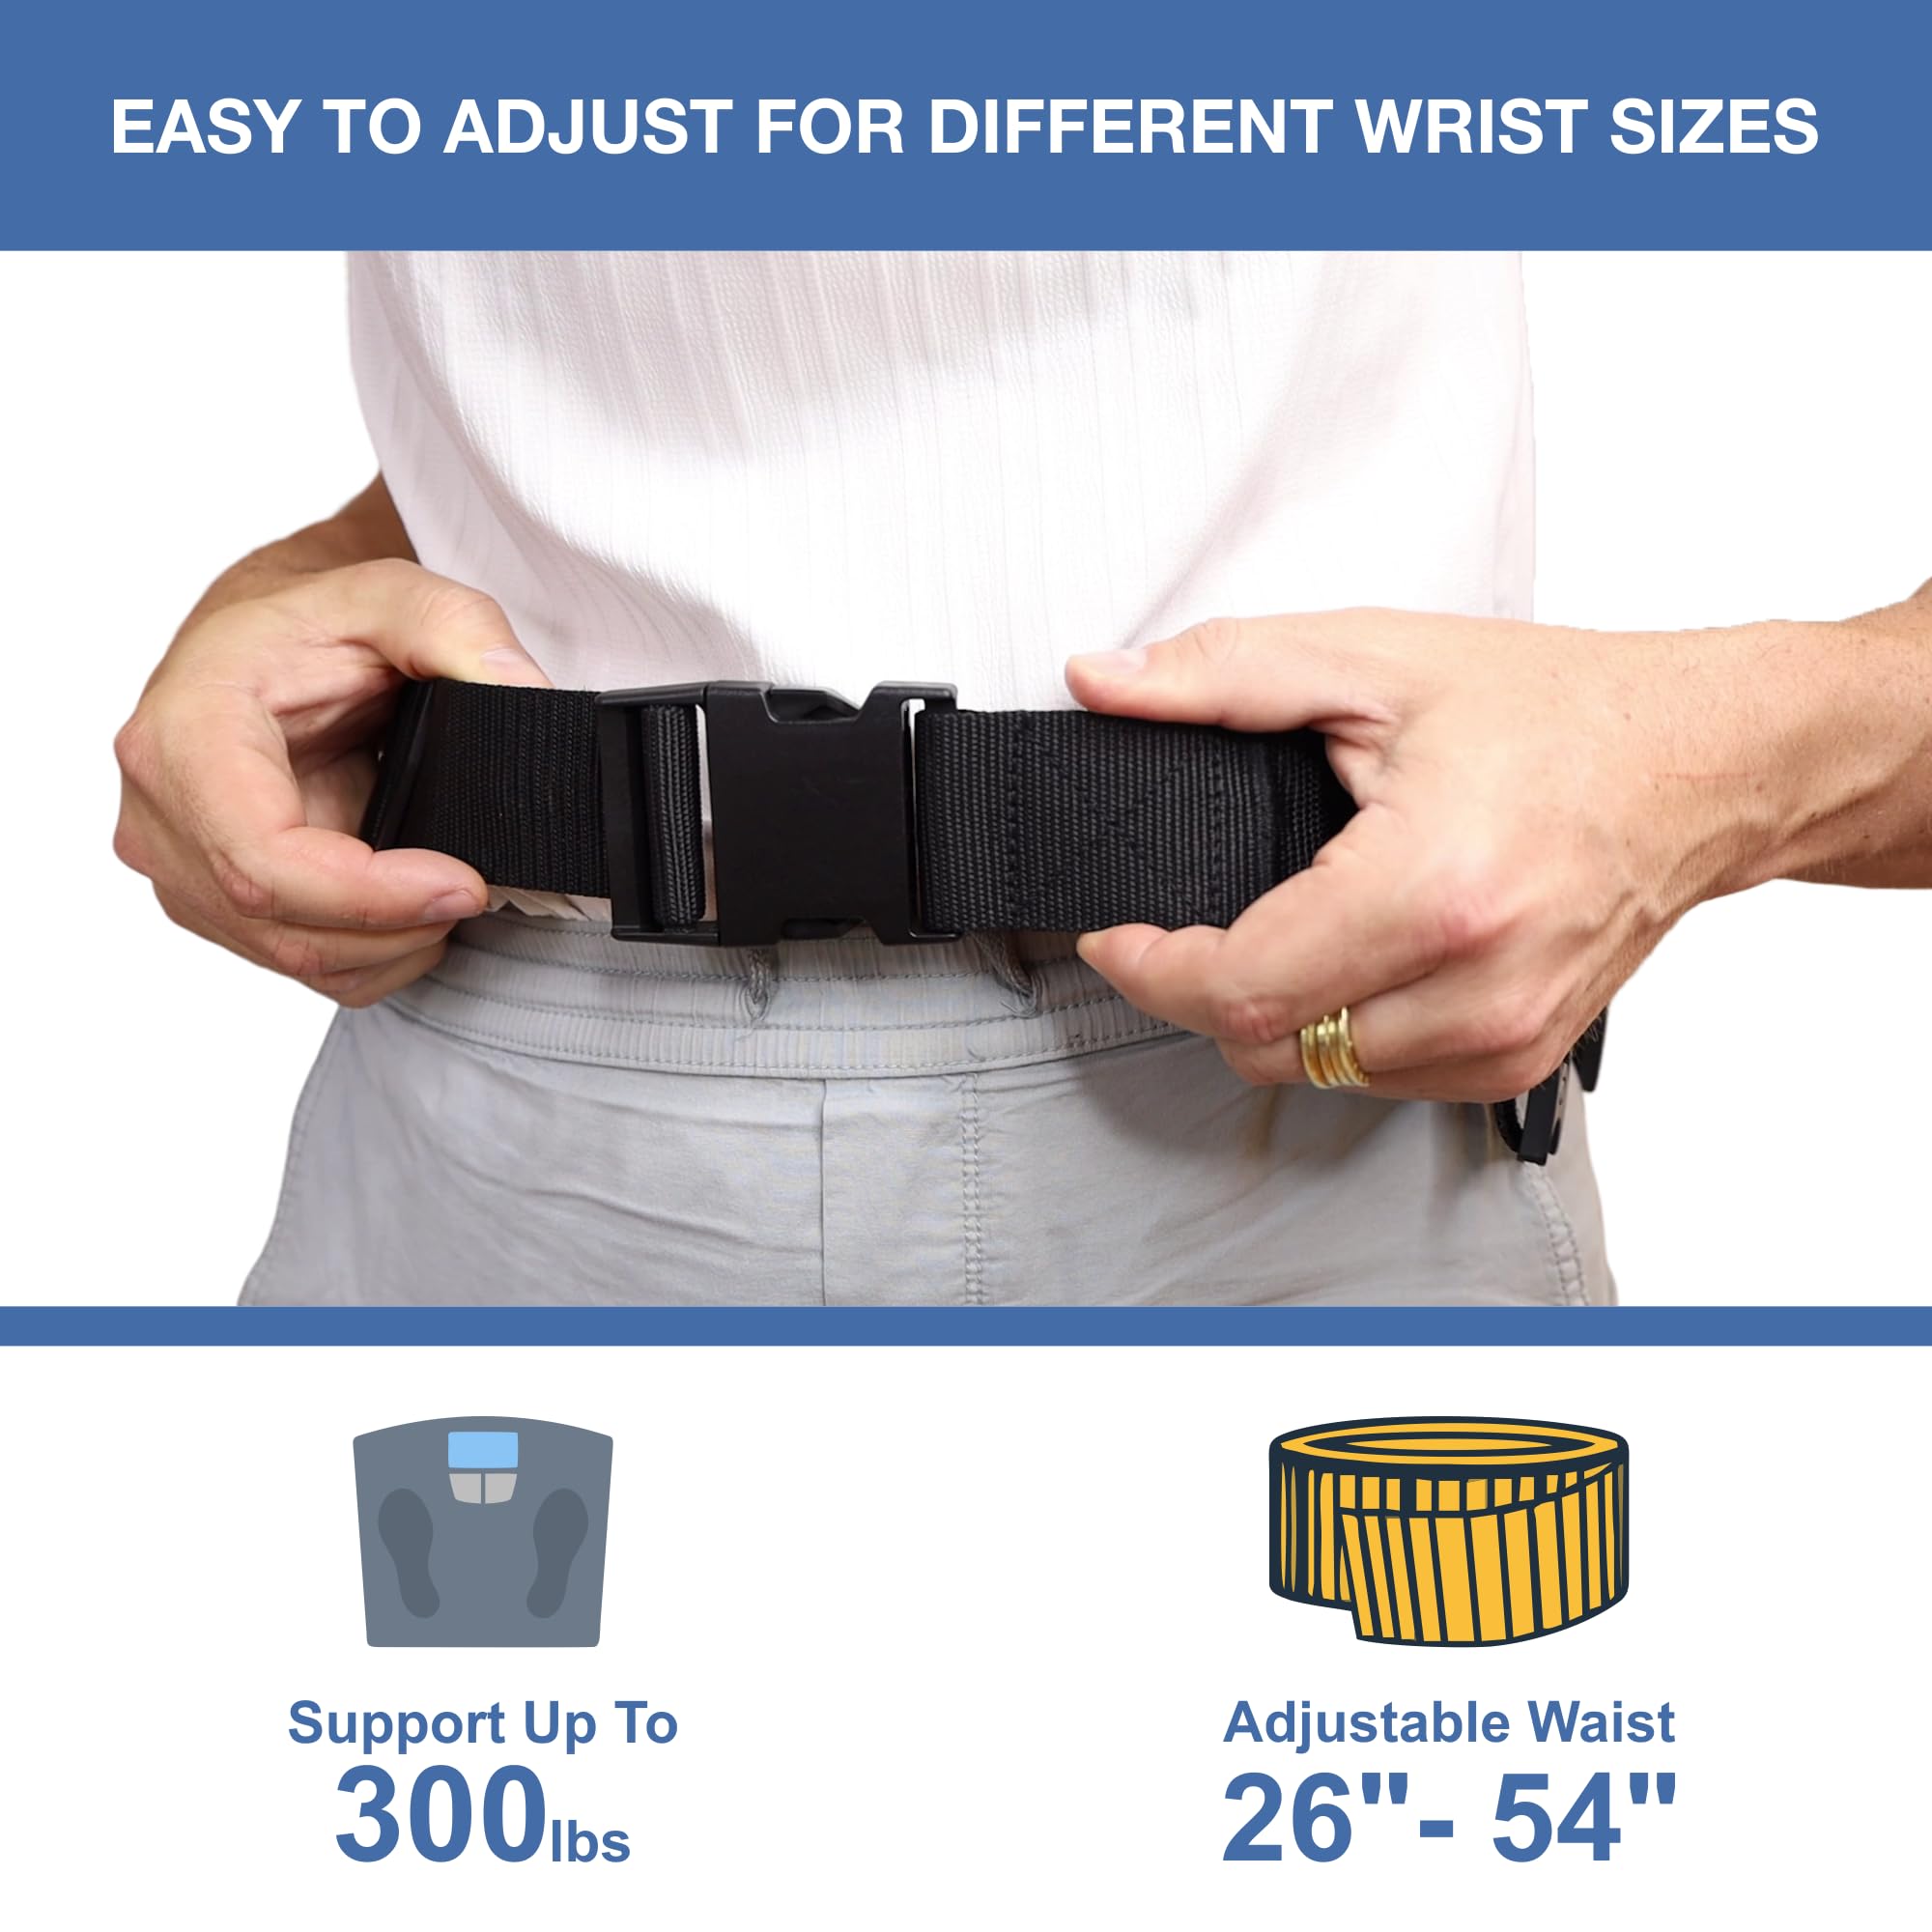 Commode Liners with Absorbent Pads & Gait Belt for Seniors - 100 Strong Portable Toilet Bags & Pads - Bedside Commode Liners Disposable - Transfer Gate Belts with Handles for Lifting Elderly & Patient